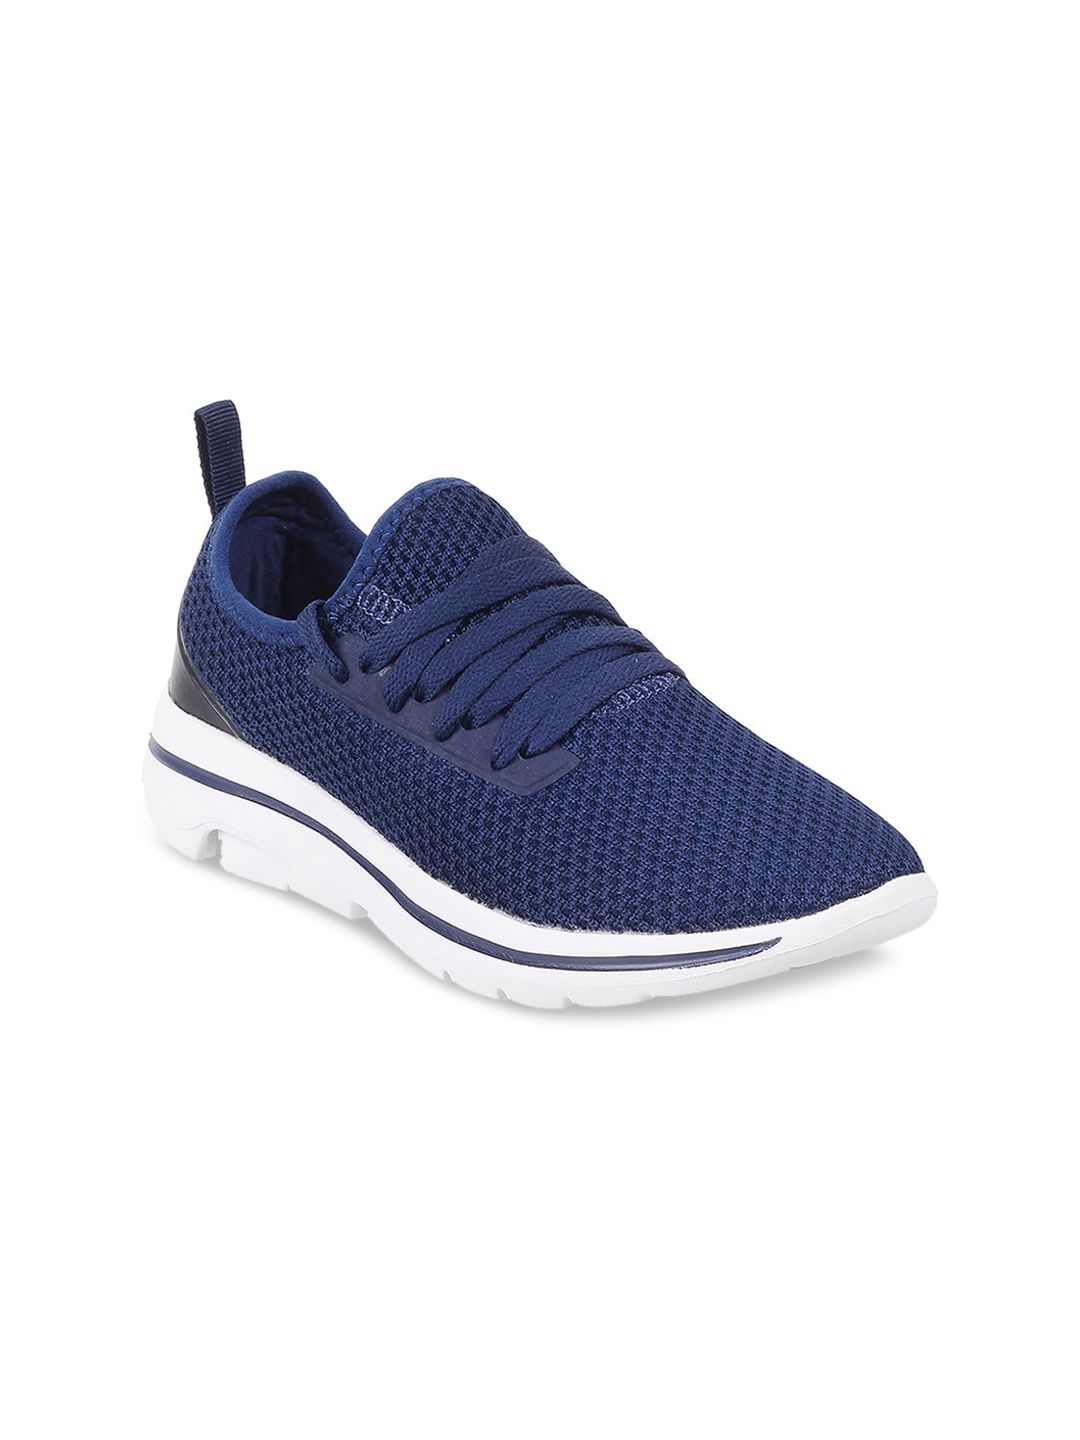 ACTIV Women Blue Woven Design Synthetic Sneakers Price in India